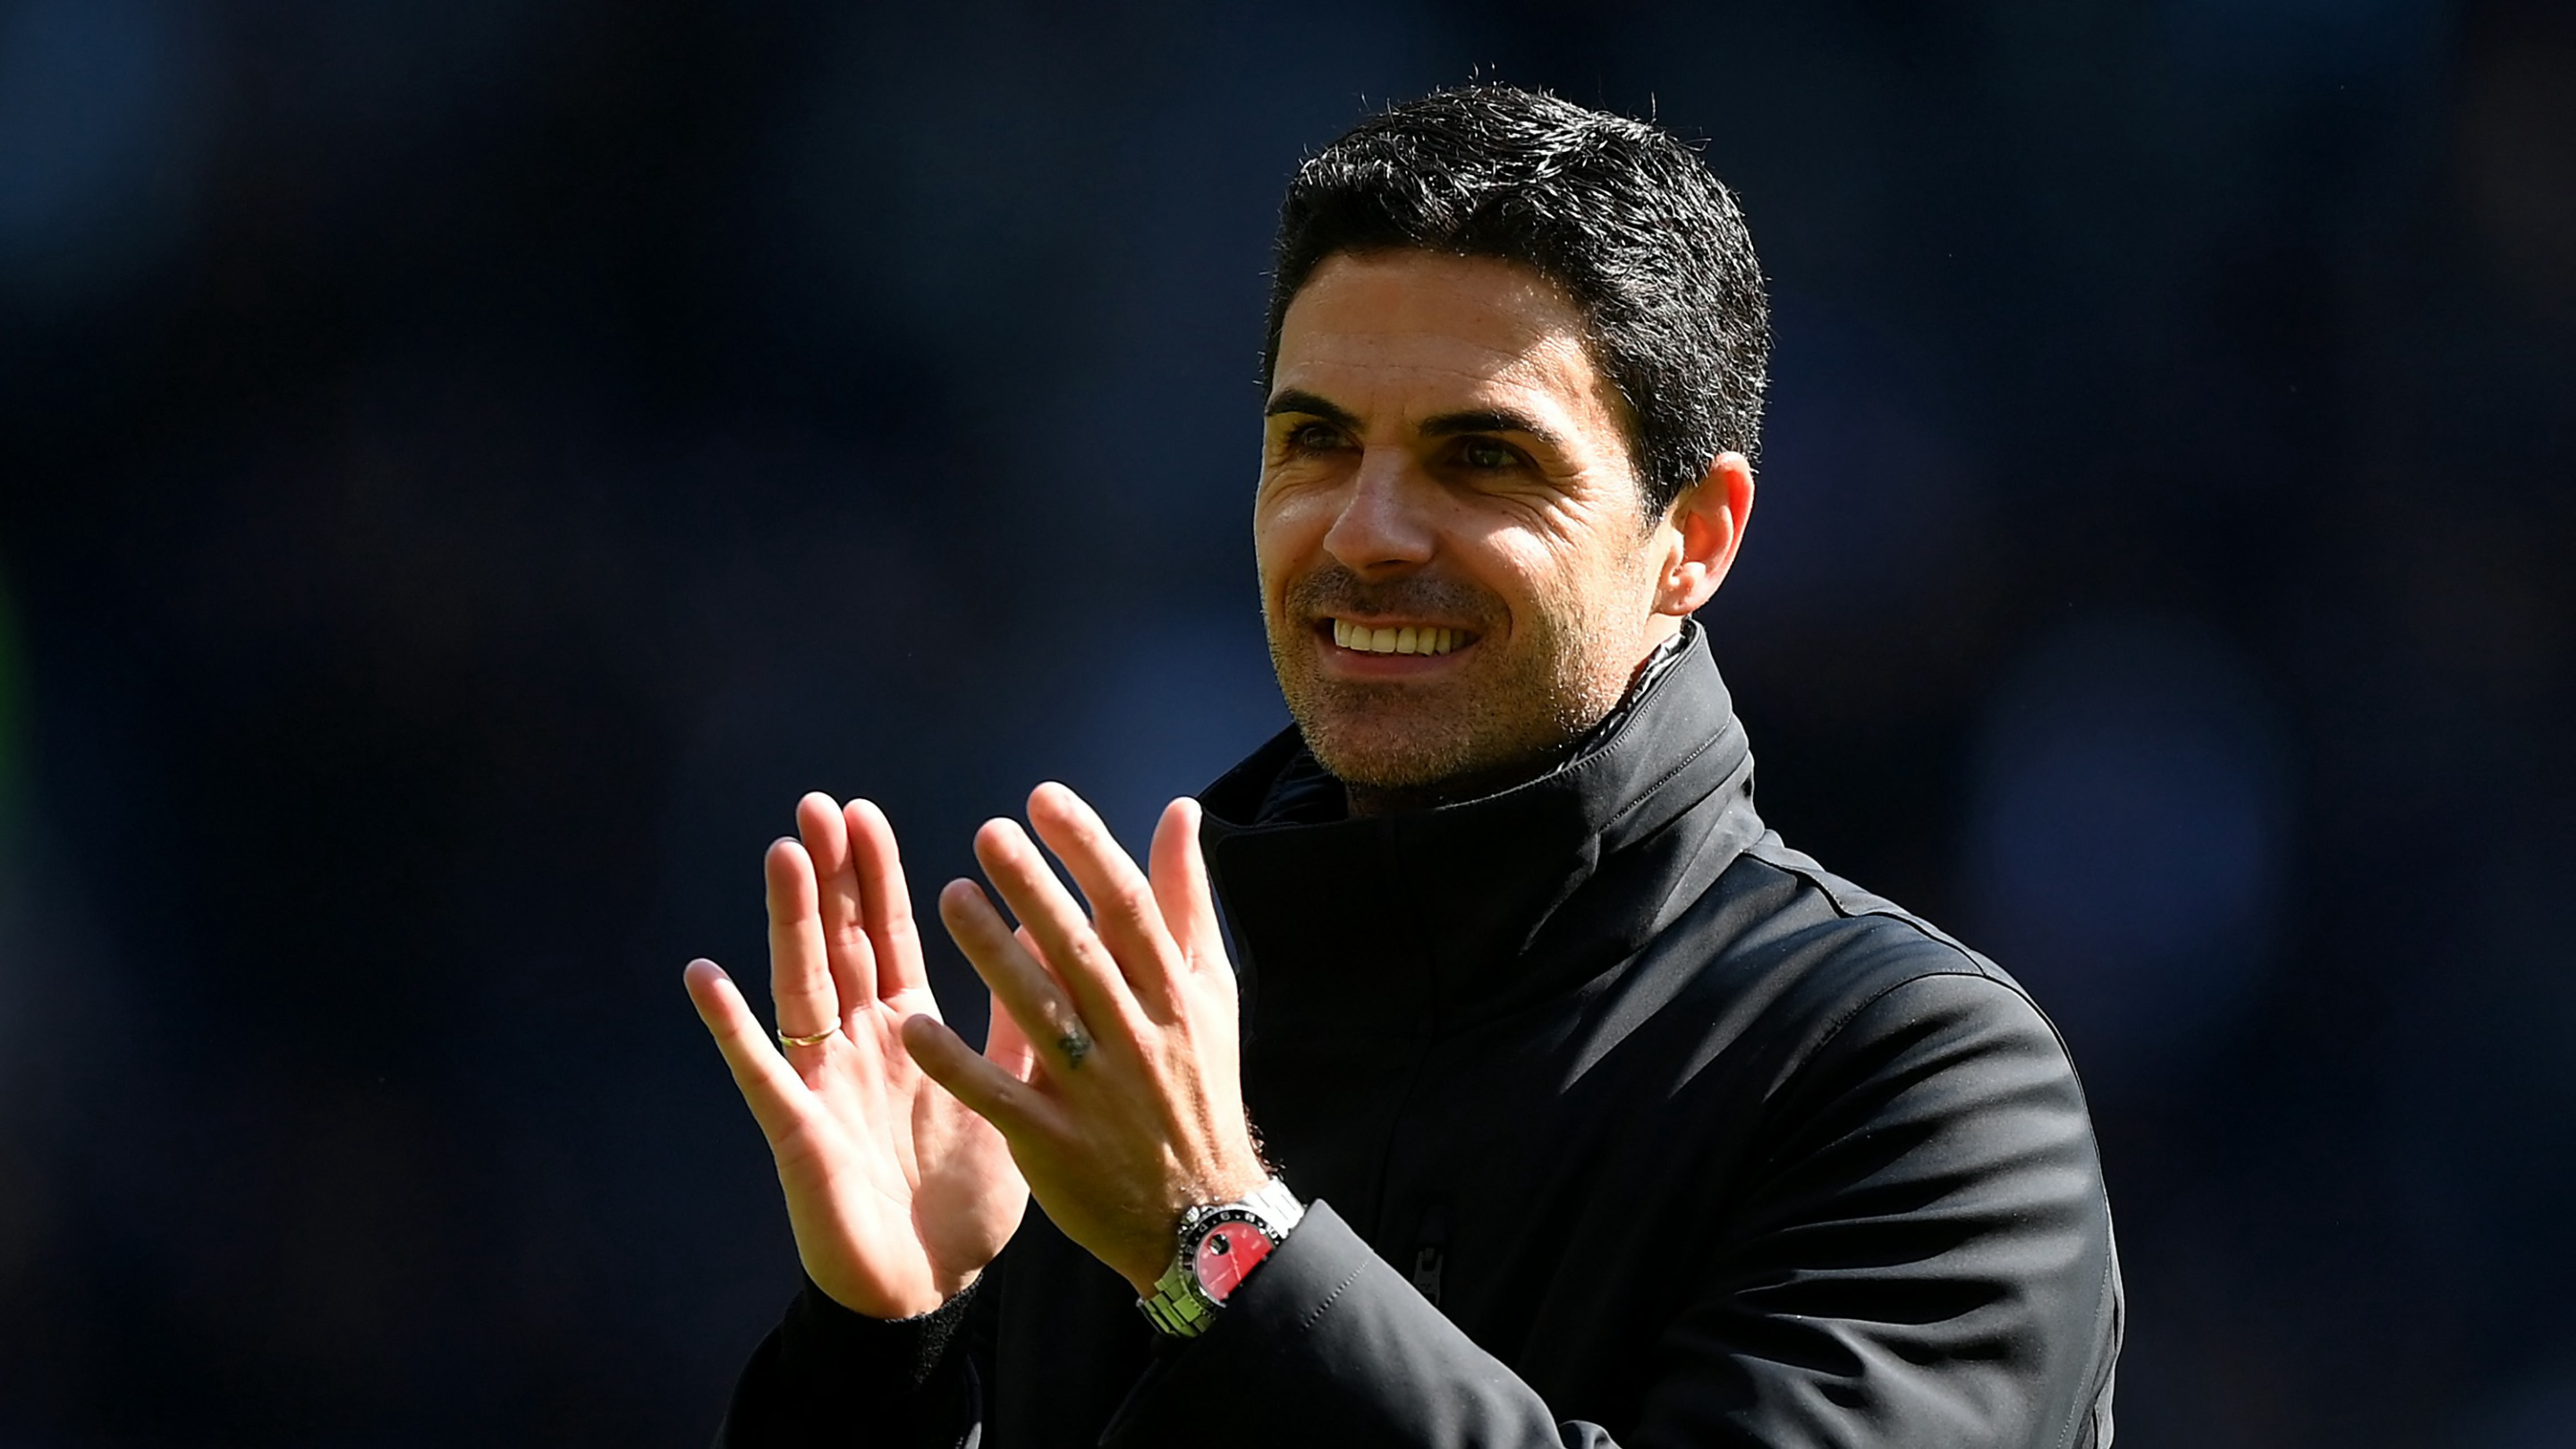 Mikel Arteta reflects on an 'emotional' north London derby win